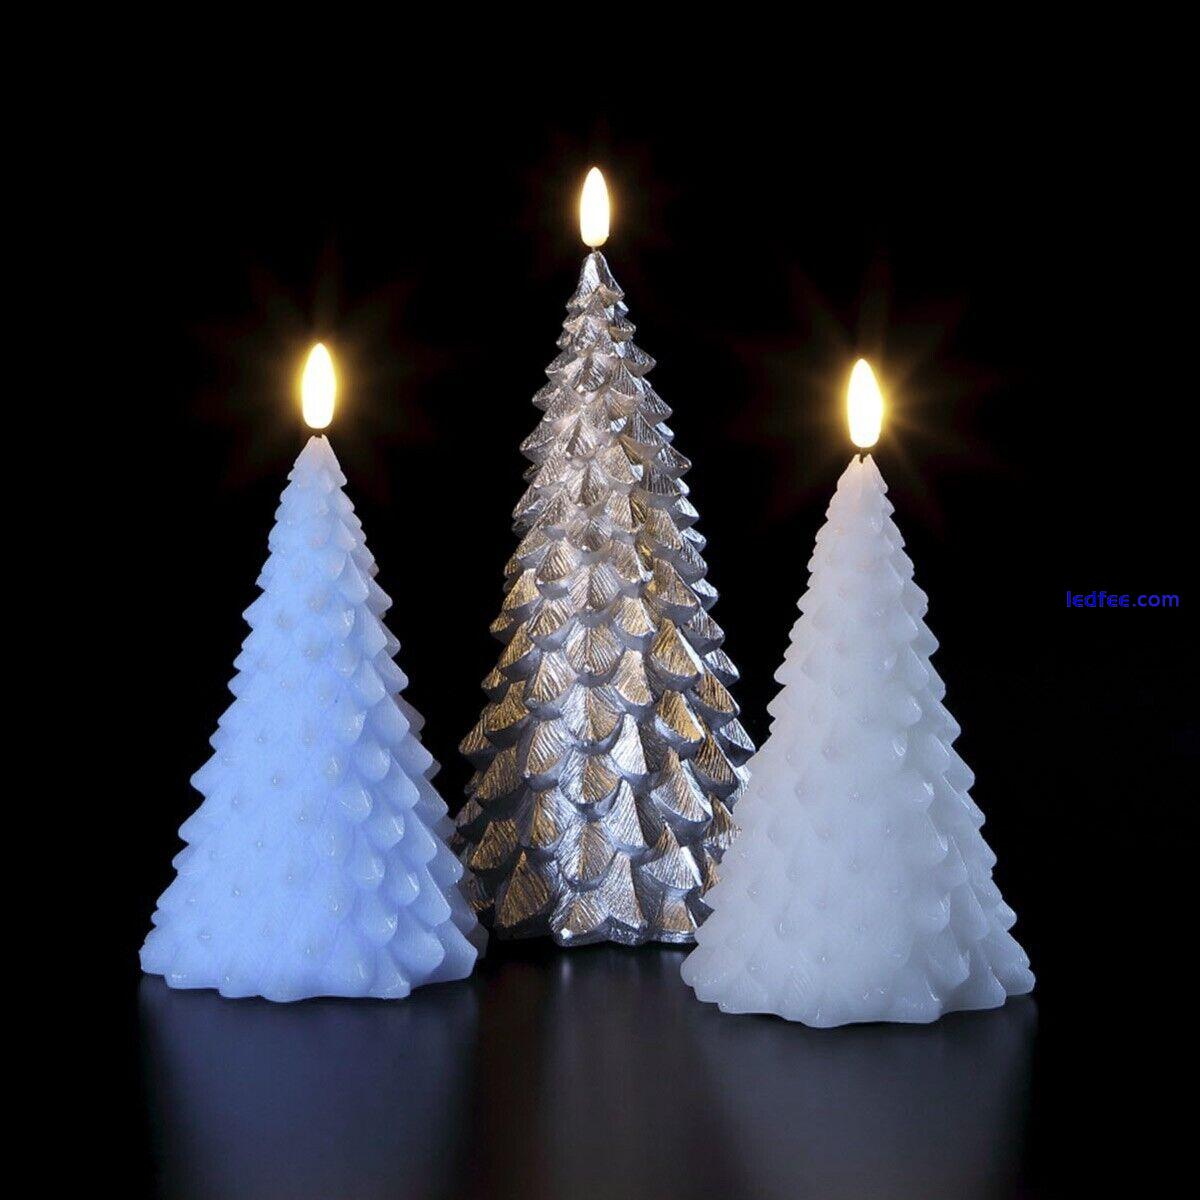 3 PACK | Icy Christmas Tree LED Battery Real Wax Light Up Flickering Candles 1 